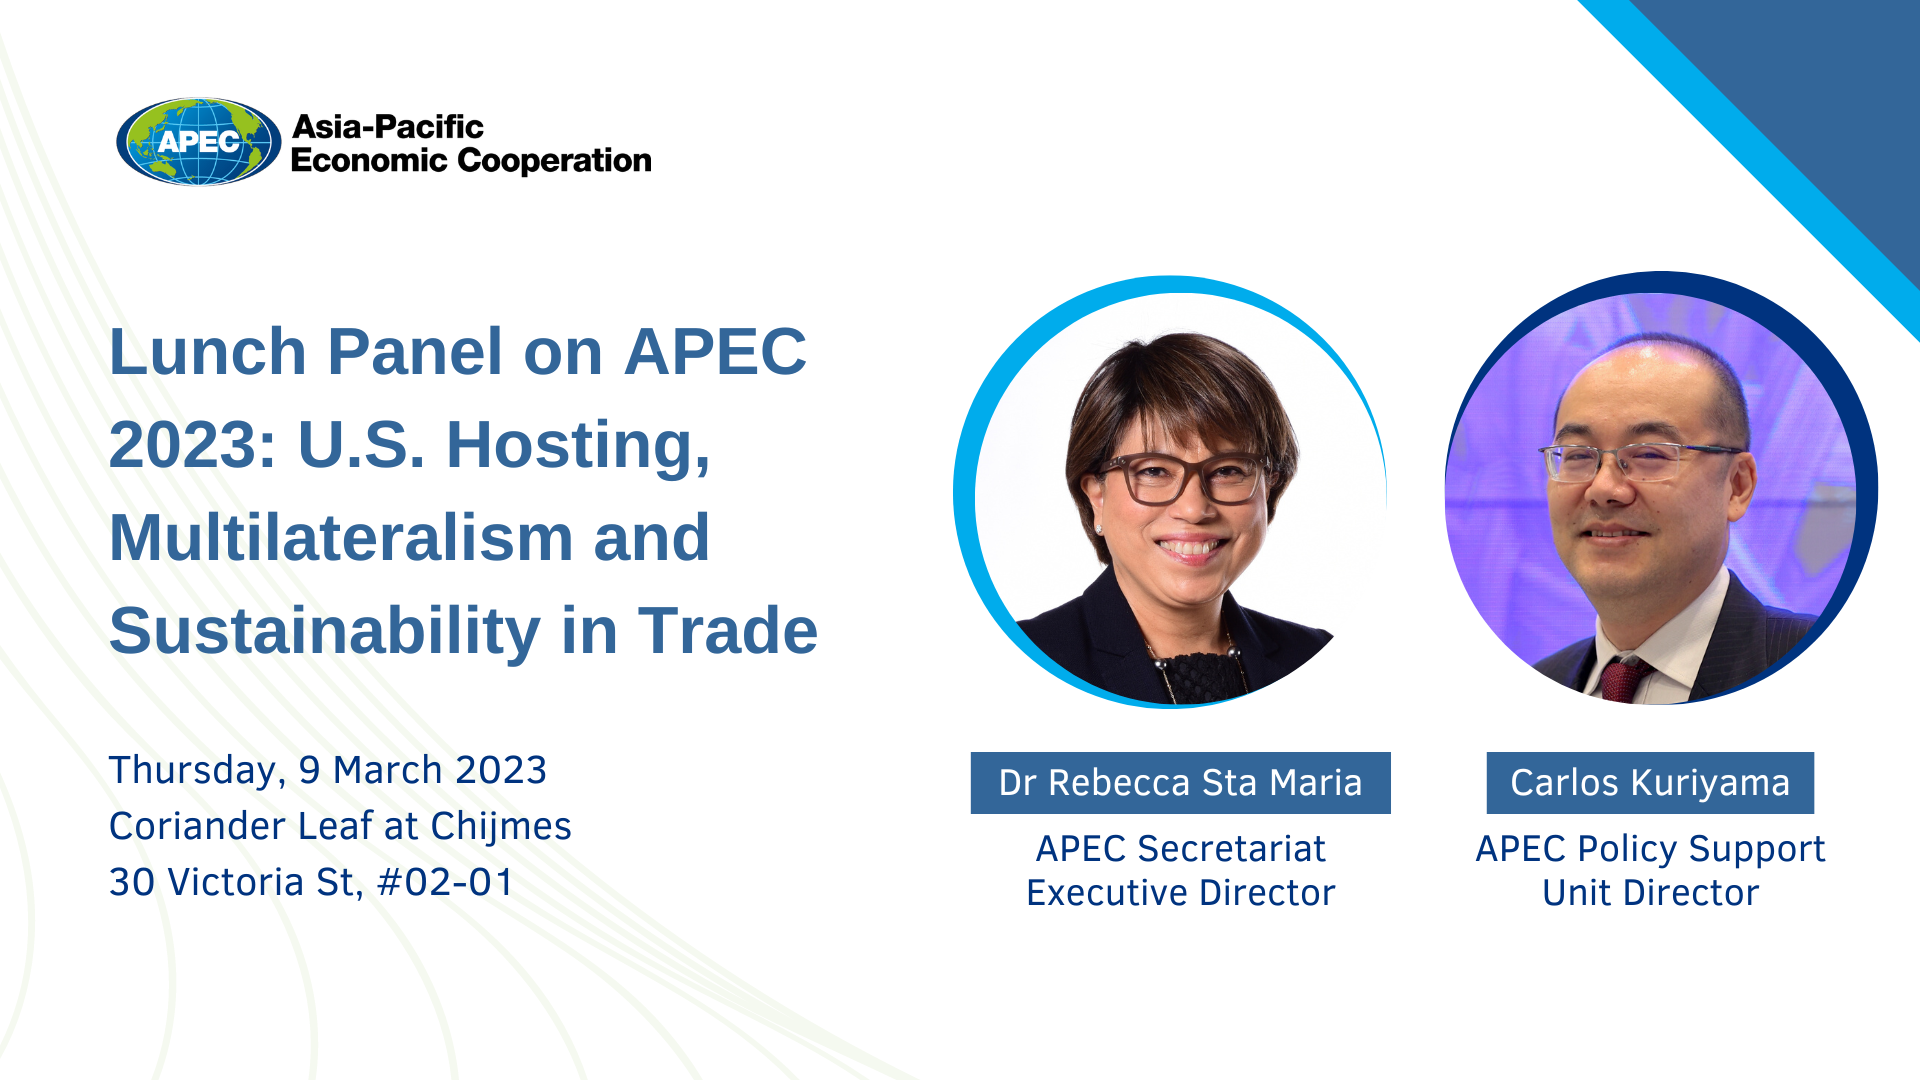 Lunch Panel on APEC 2023: U.S. Hosting, Multilateralism and Sustainability in Trade